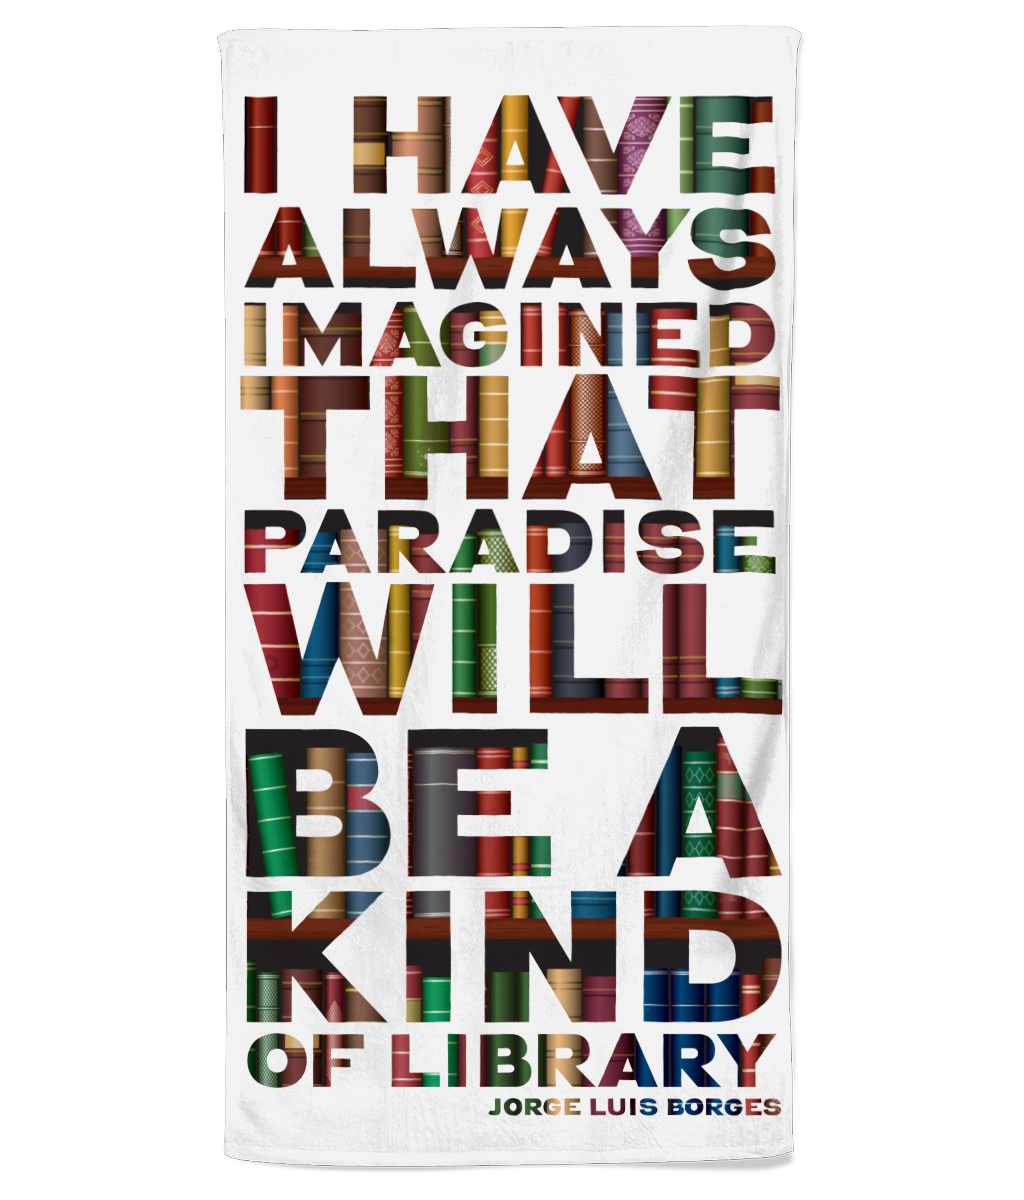 Book Lover Beach Towel "I have always imagined that paradise will be a kind of library" gift for book and swimming lover